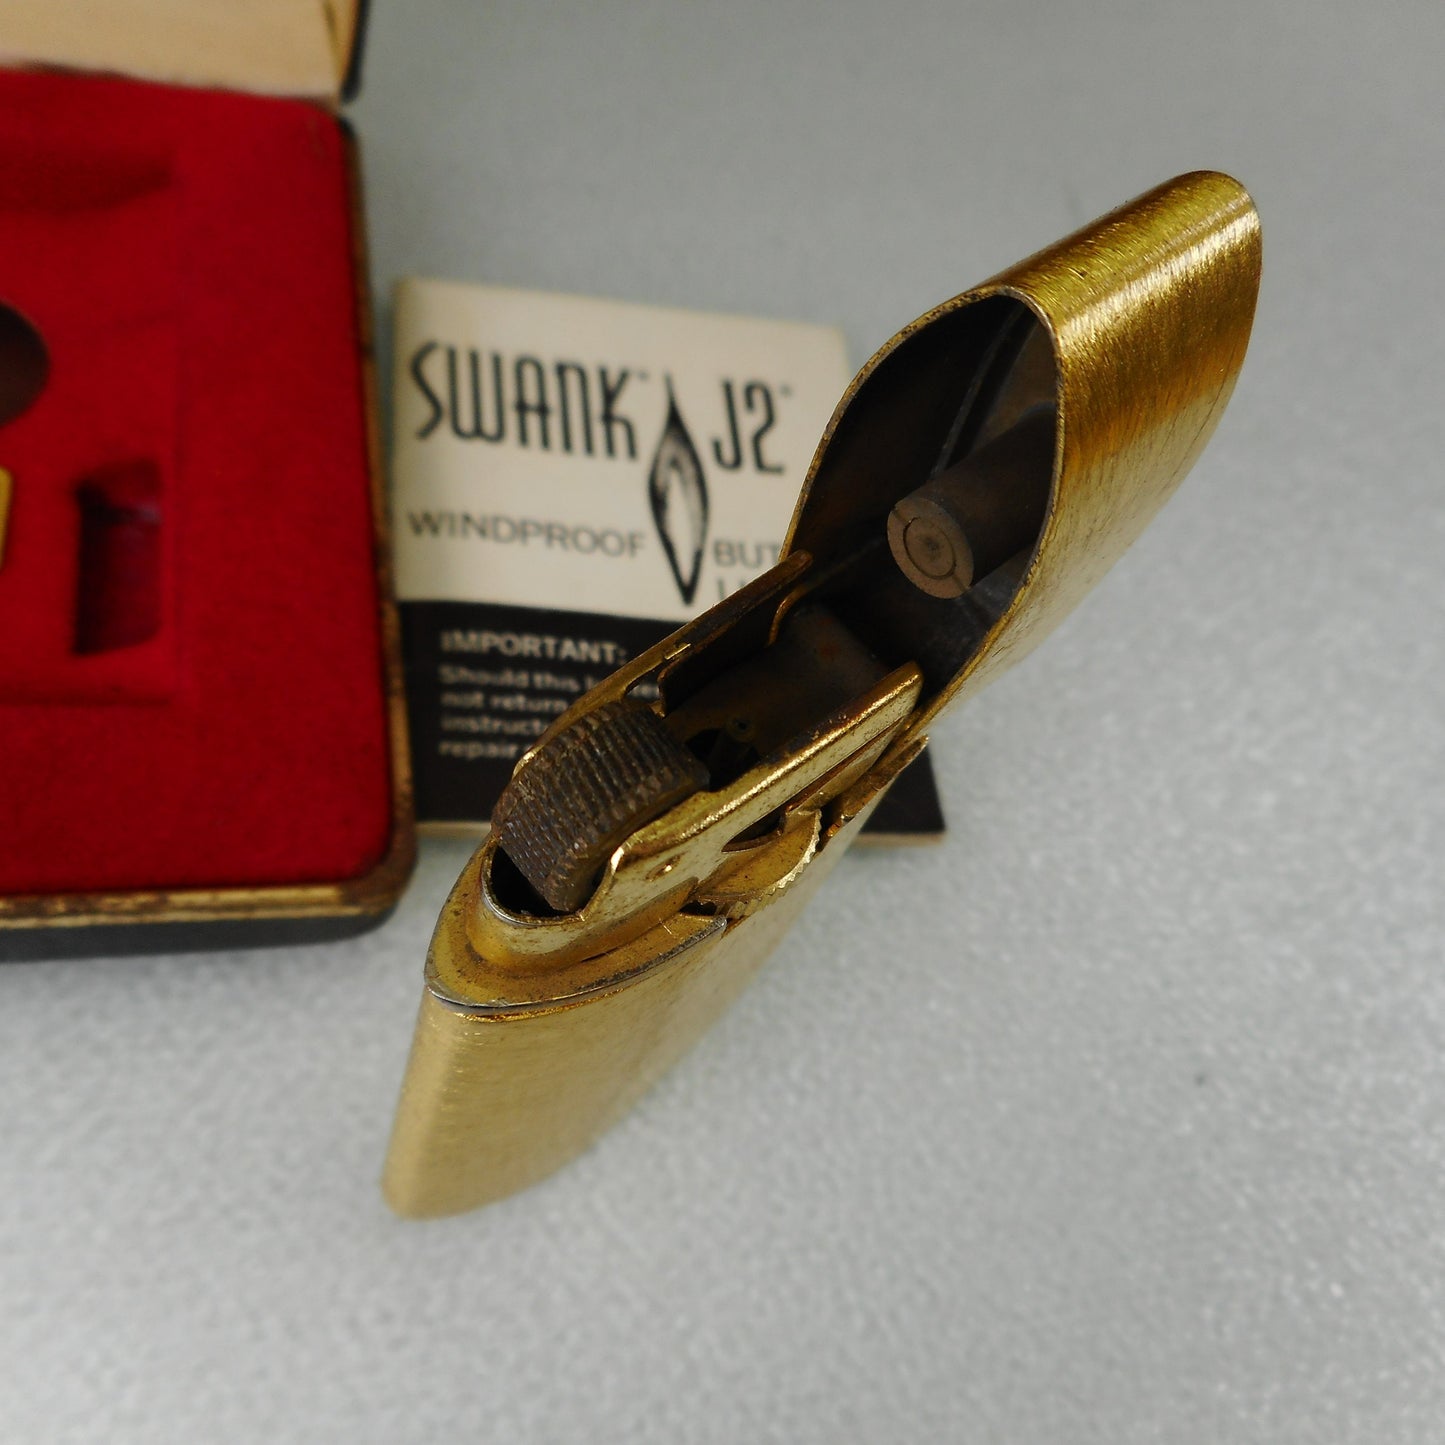 Swank J2 Windproof Butane Lighter with Case Papers  - Brushed Gold Tone mid century